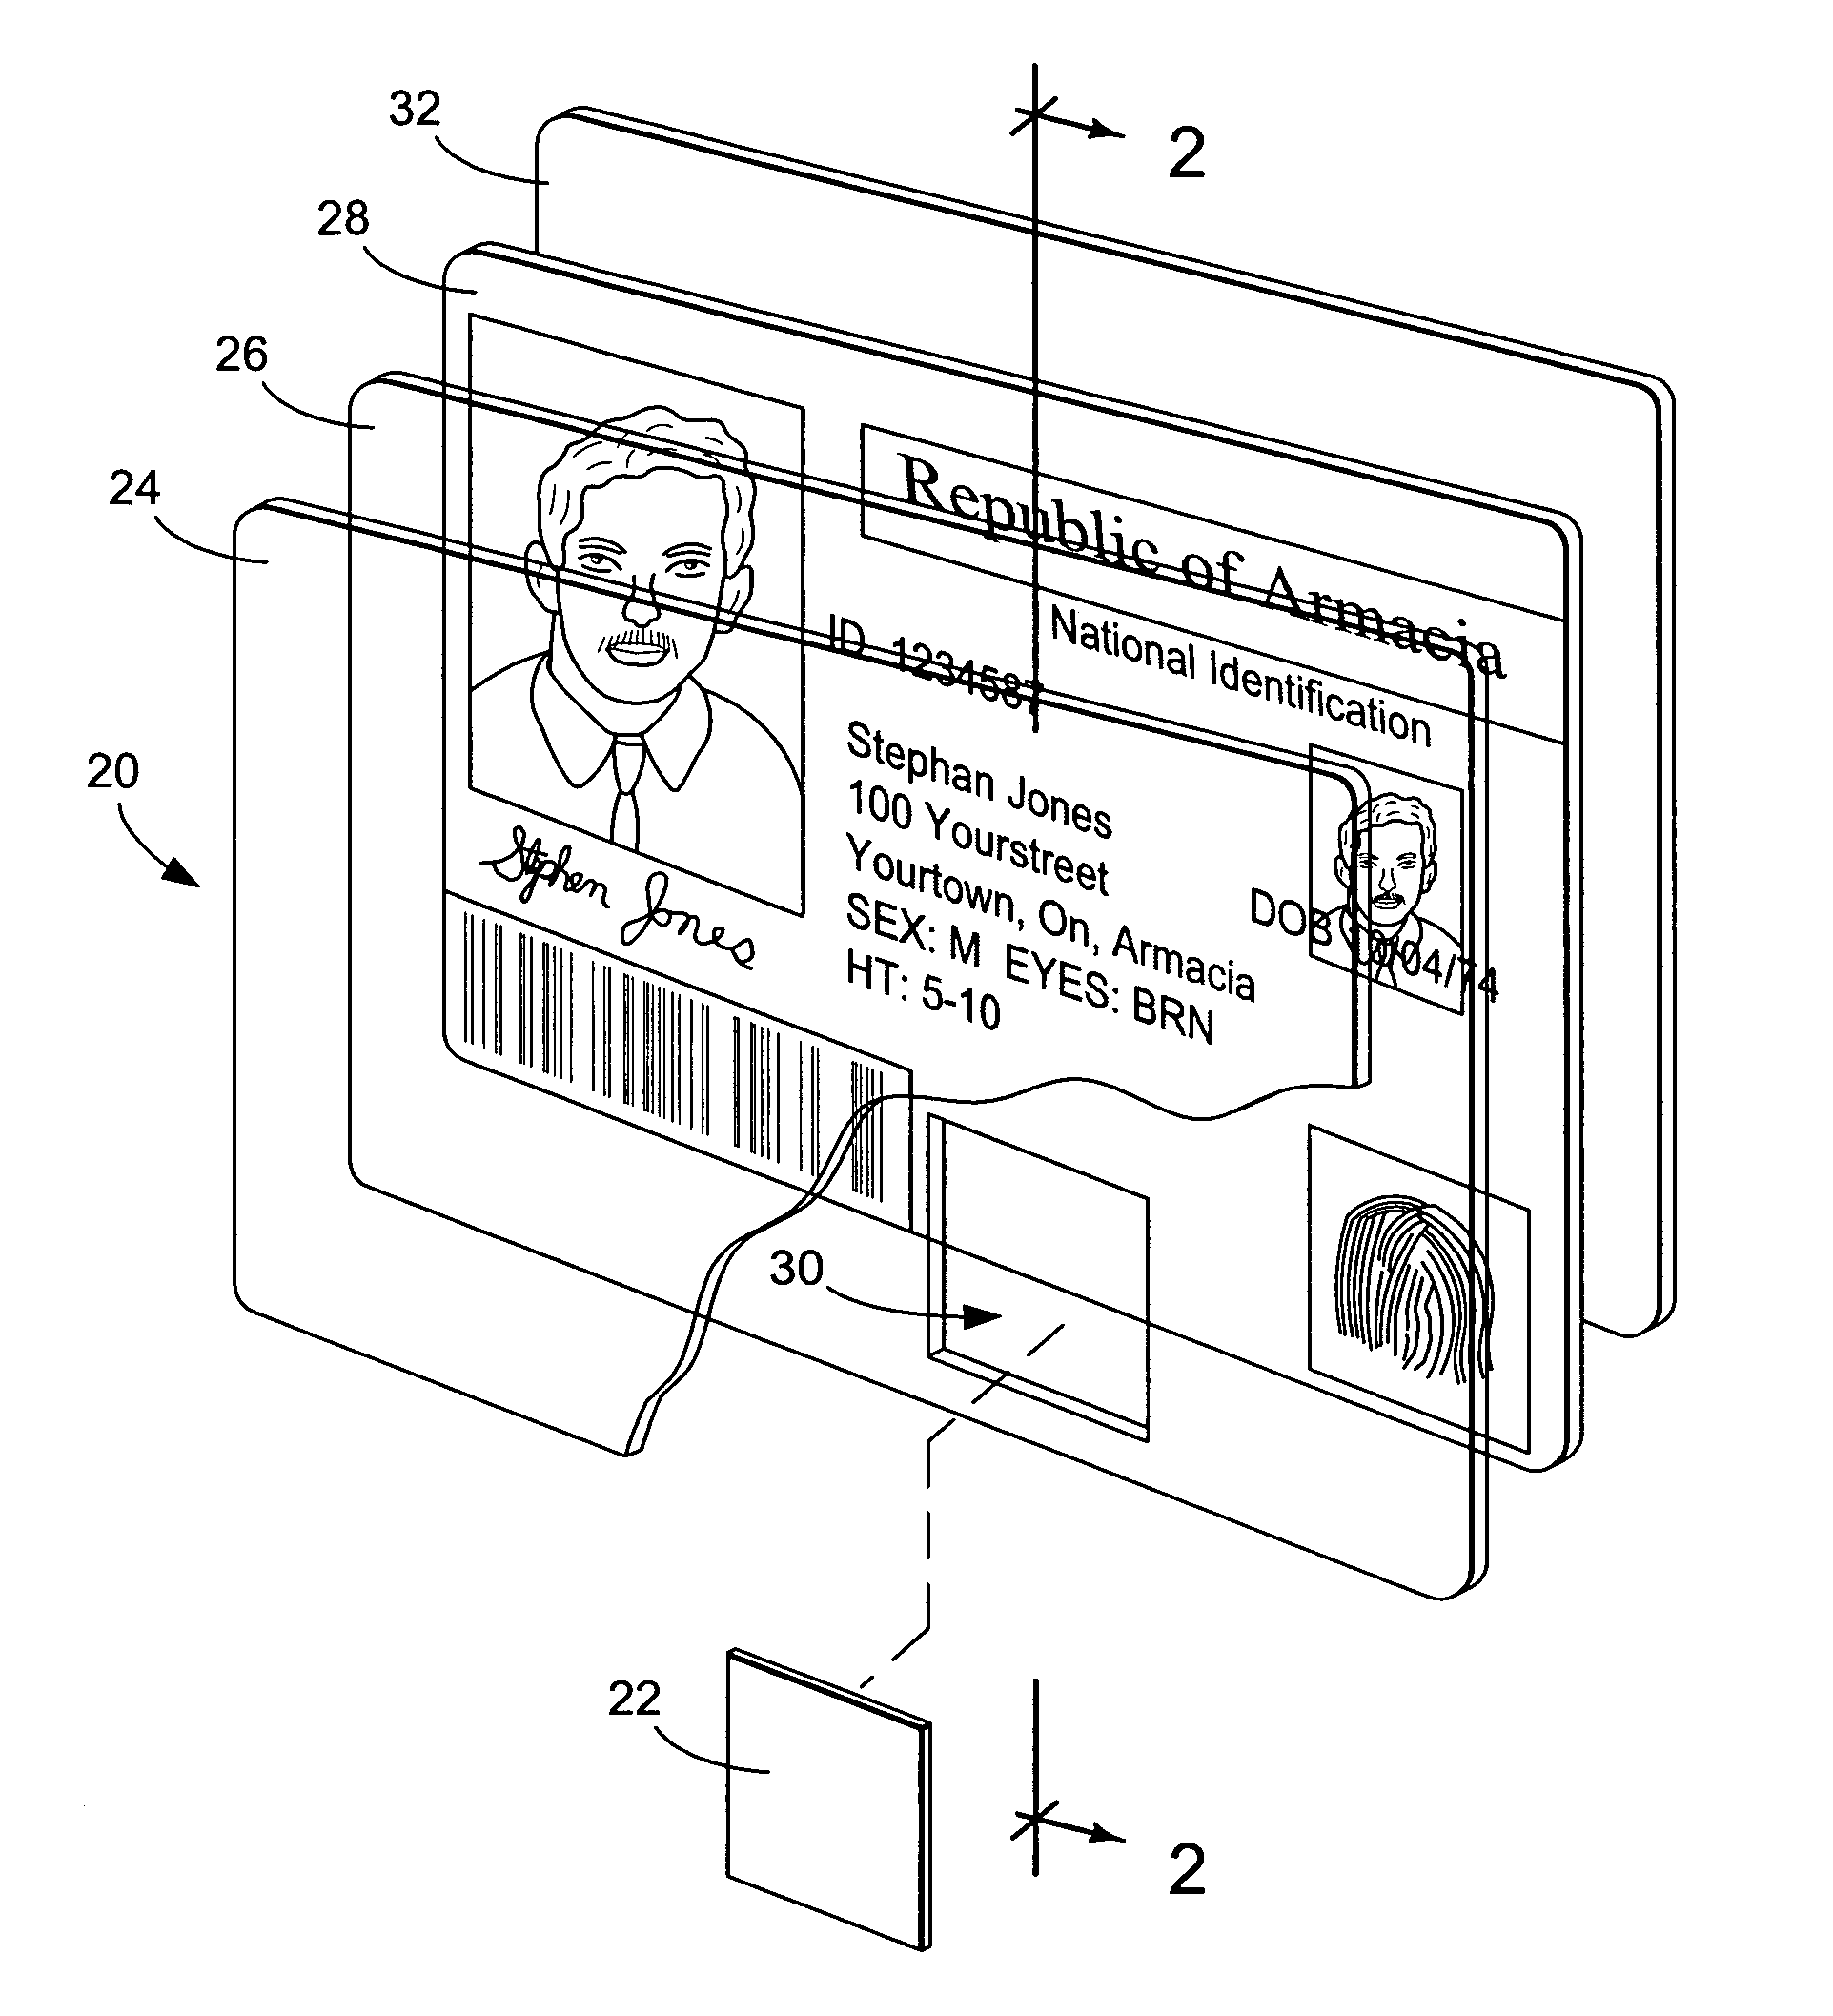 Identification document with optical memory and related method of manufacture